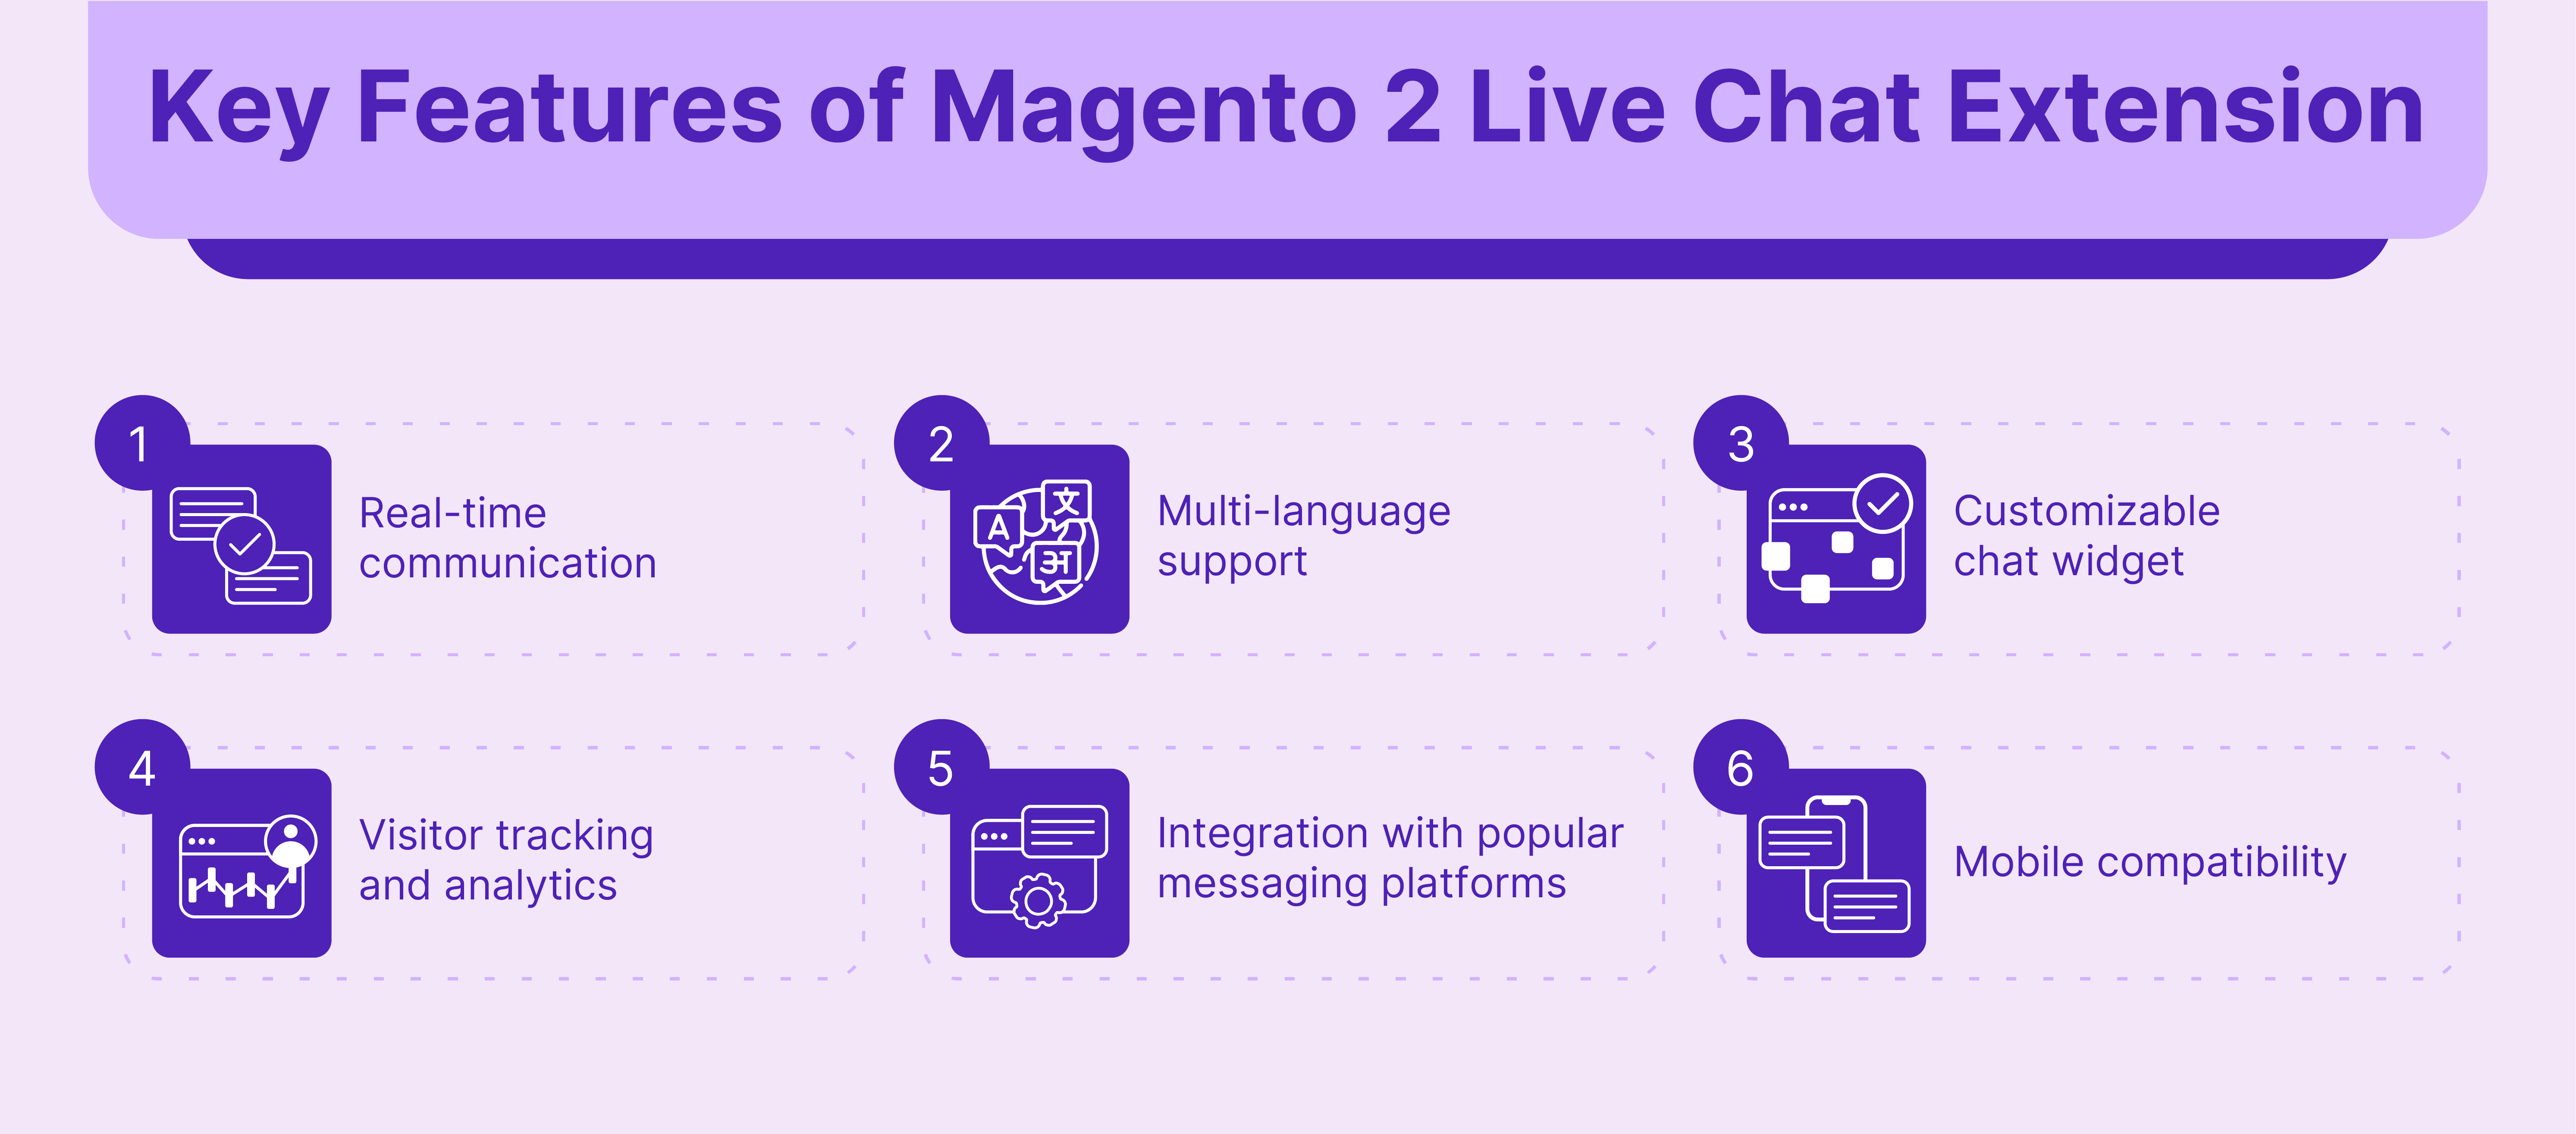 Features of Magento 2 Live Chat Extension